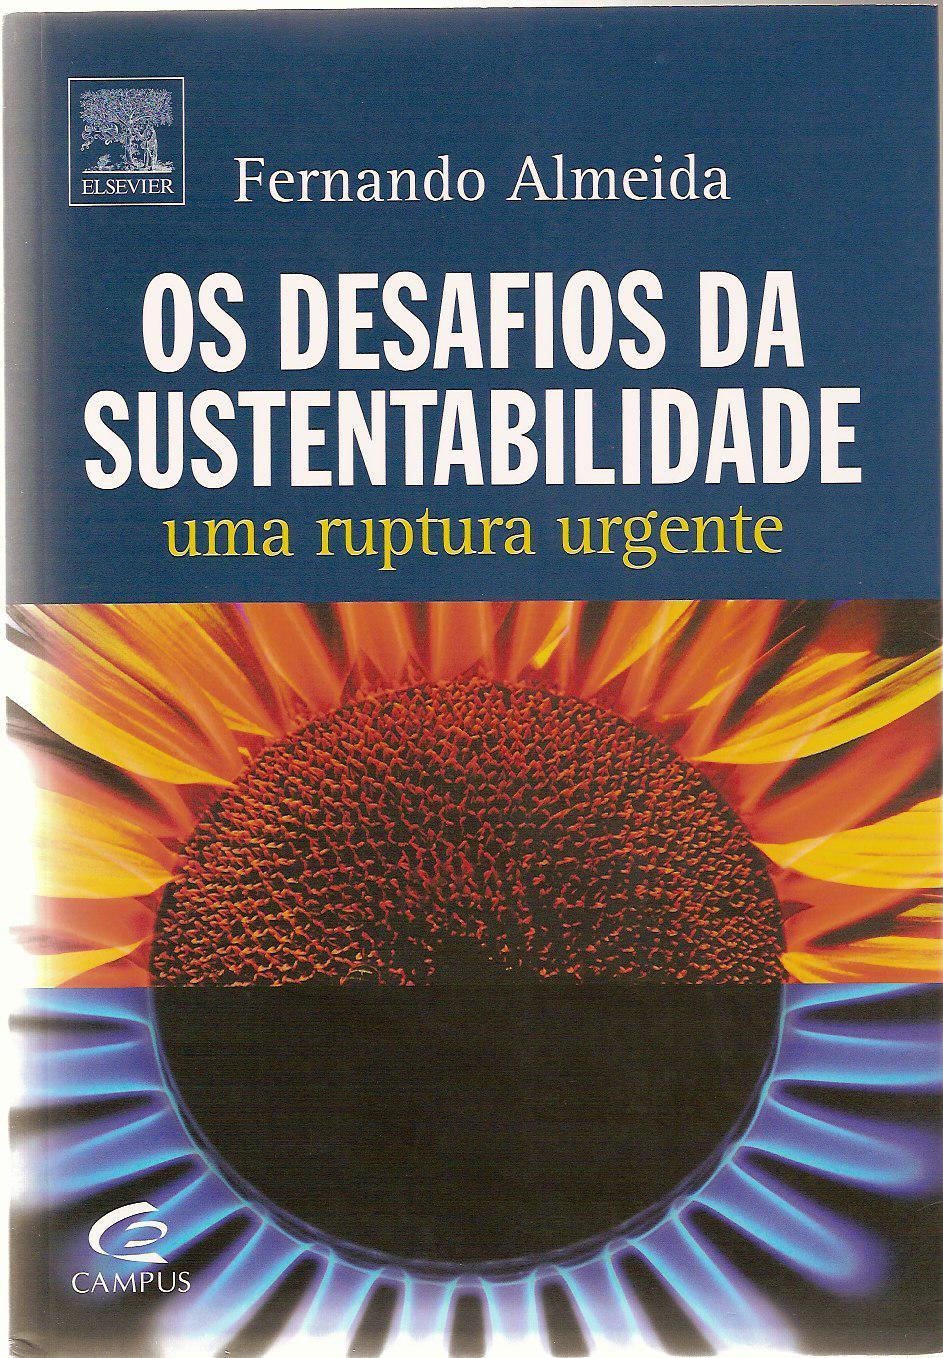 F. Almeida, 2007, Desafios da Sustentabilidade (Sustainablity challenges) Way of thinking and doing Natural resources need to be perennial - ruin of planetary ecosystems is business ruin Do business